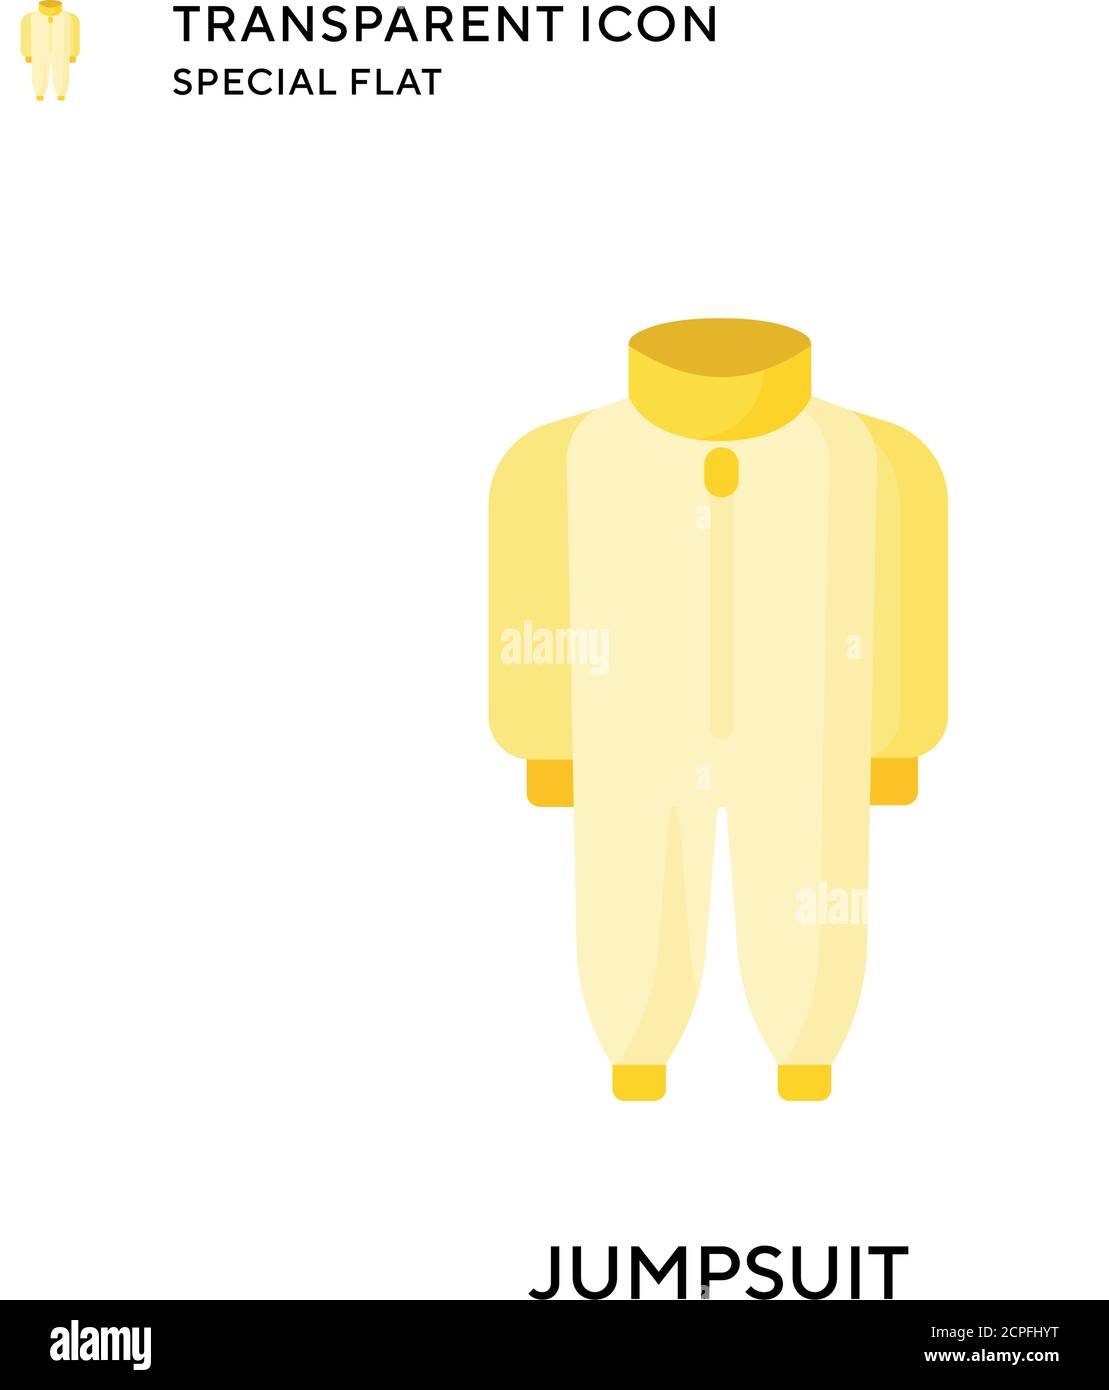 Jumpsuit vector icon. Flat style illustration. EPS 10 vector. Stock Vector